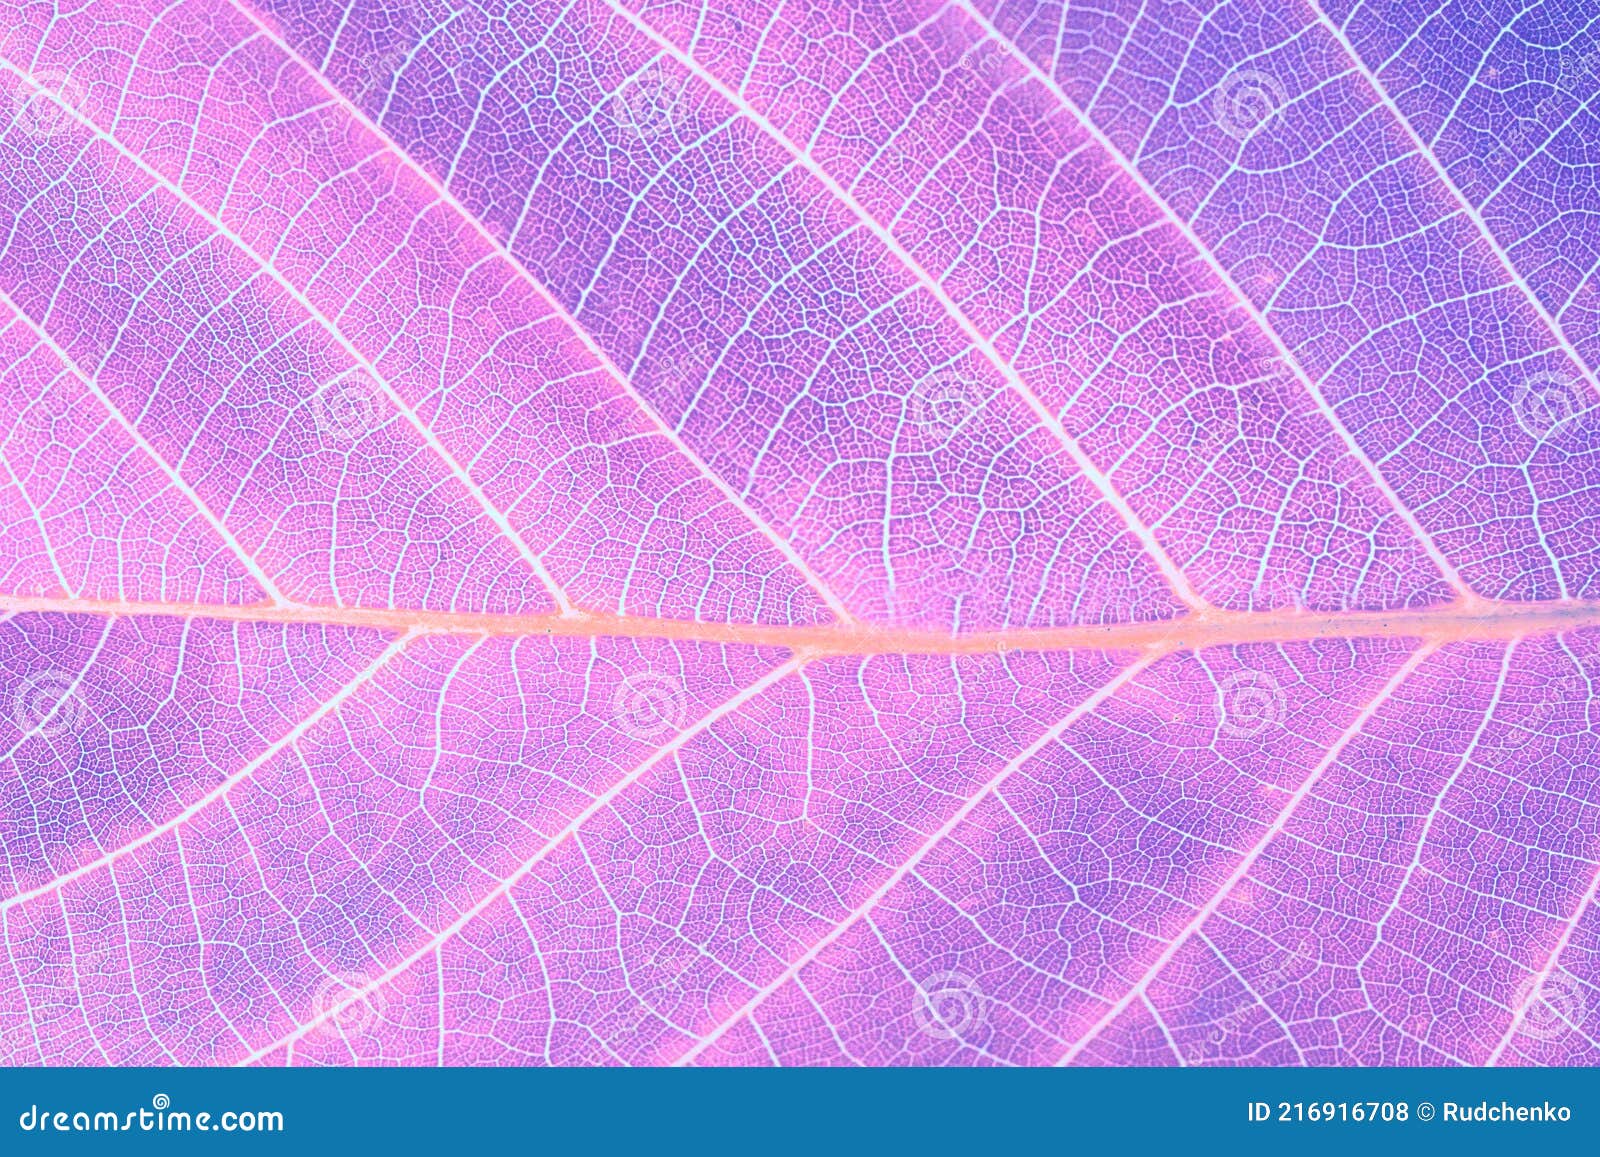 macro leaf texture. abstract nature background. saturated lilac violet color